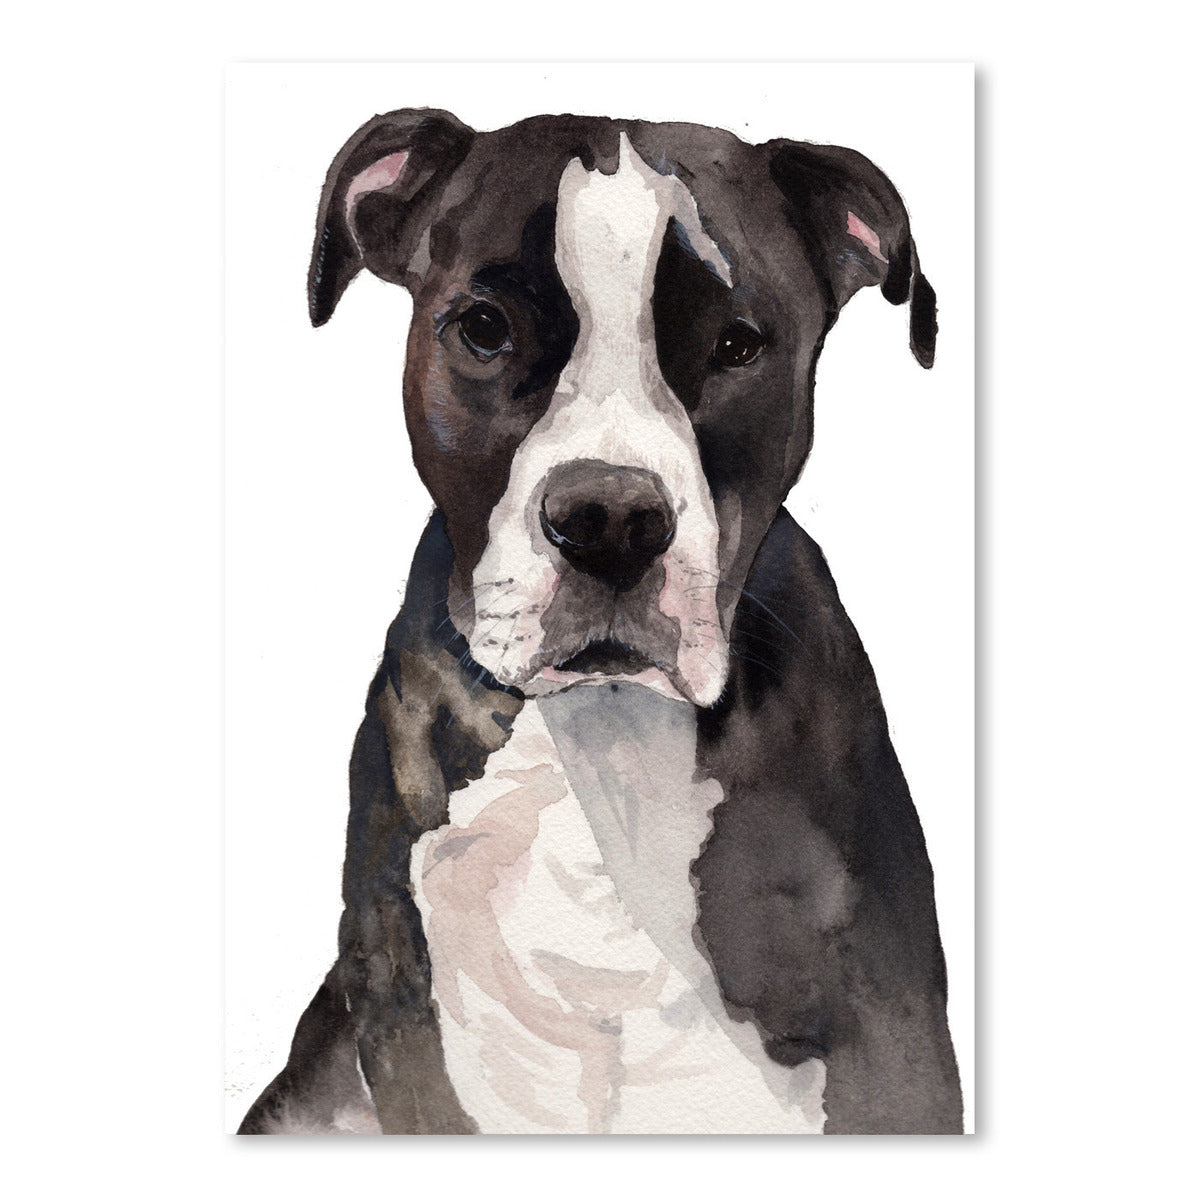 Empire Art Direct Pitbull Black and White Pet Paintings on